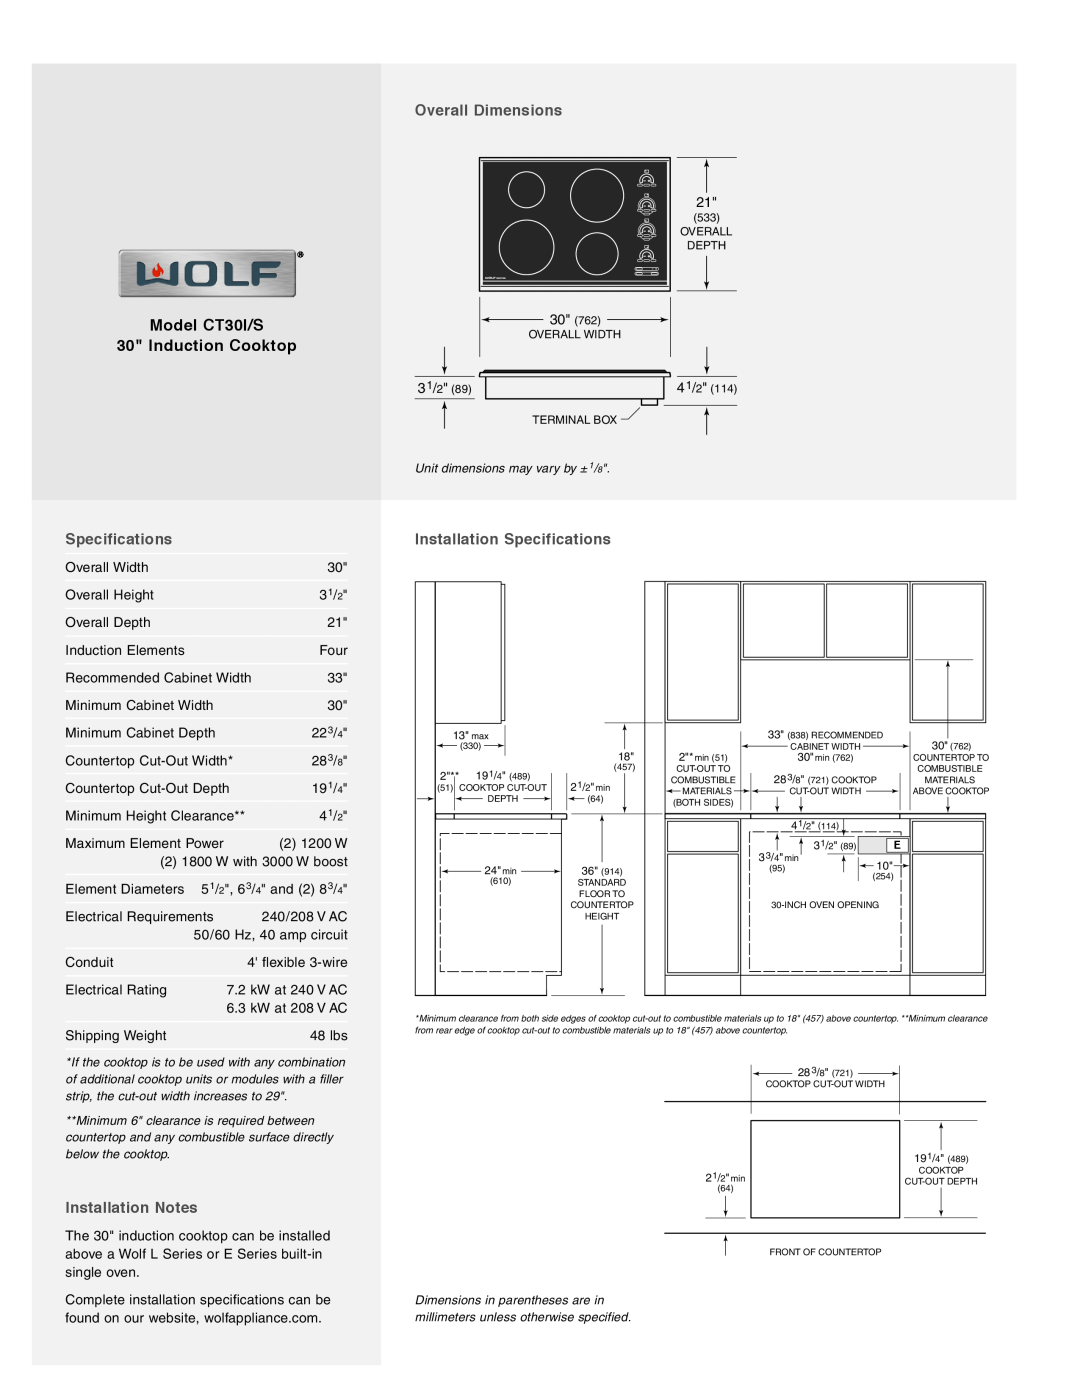 Wolf Appliance Company CT30I/S manual Overall Dimensions, Installation Specifications, Installation Notes 